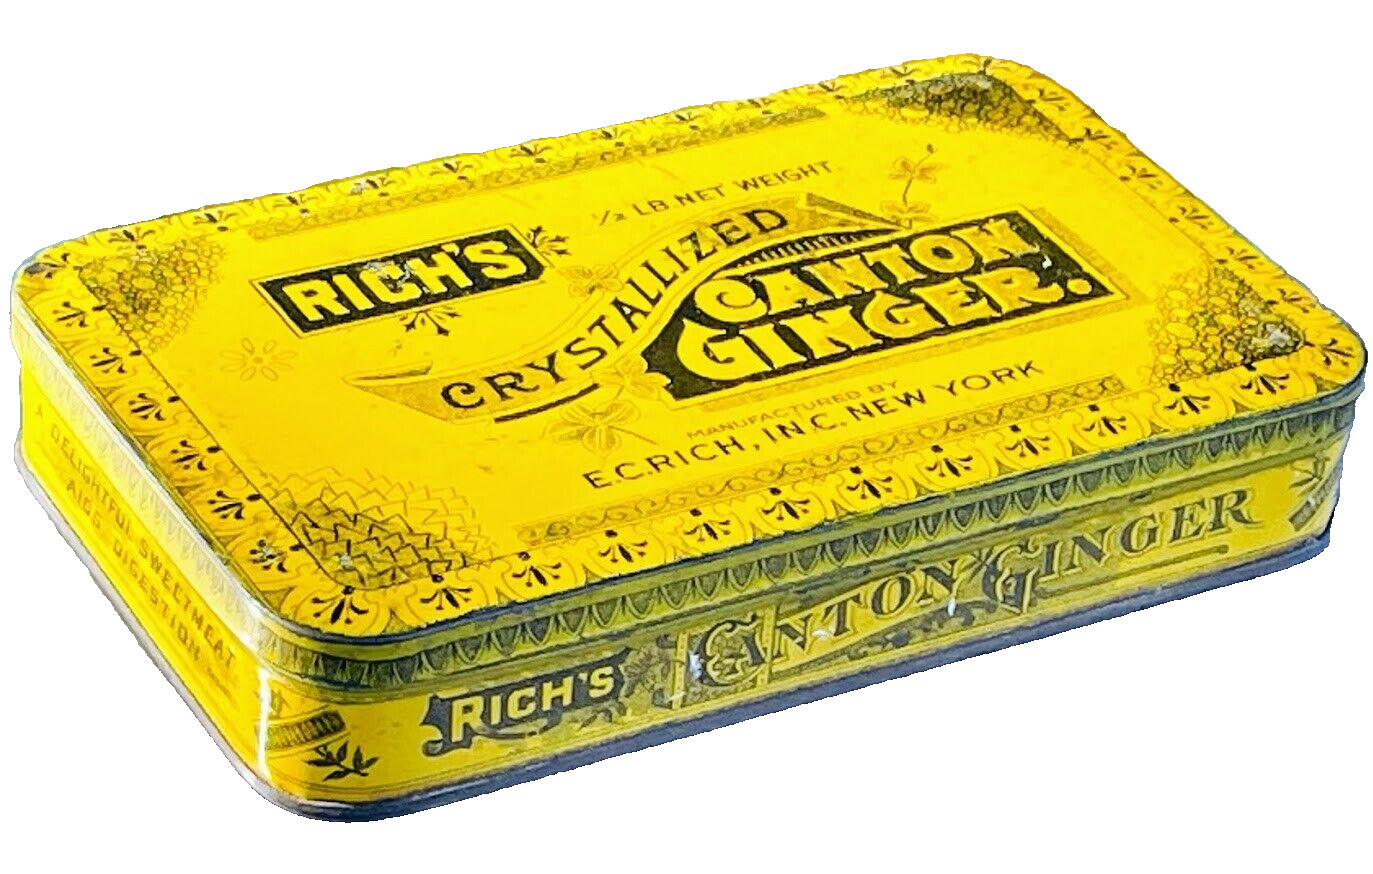 Vintage Advertising Tin Box RICH'S CANTON GINGER New York Yellow Lidded Empty